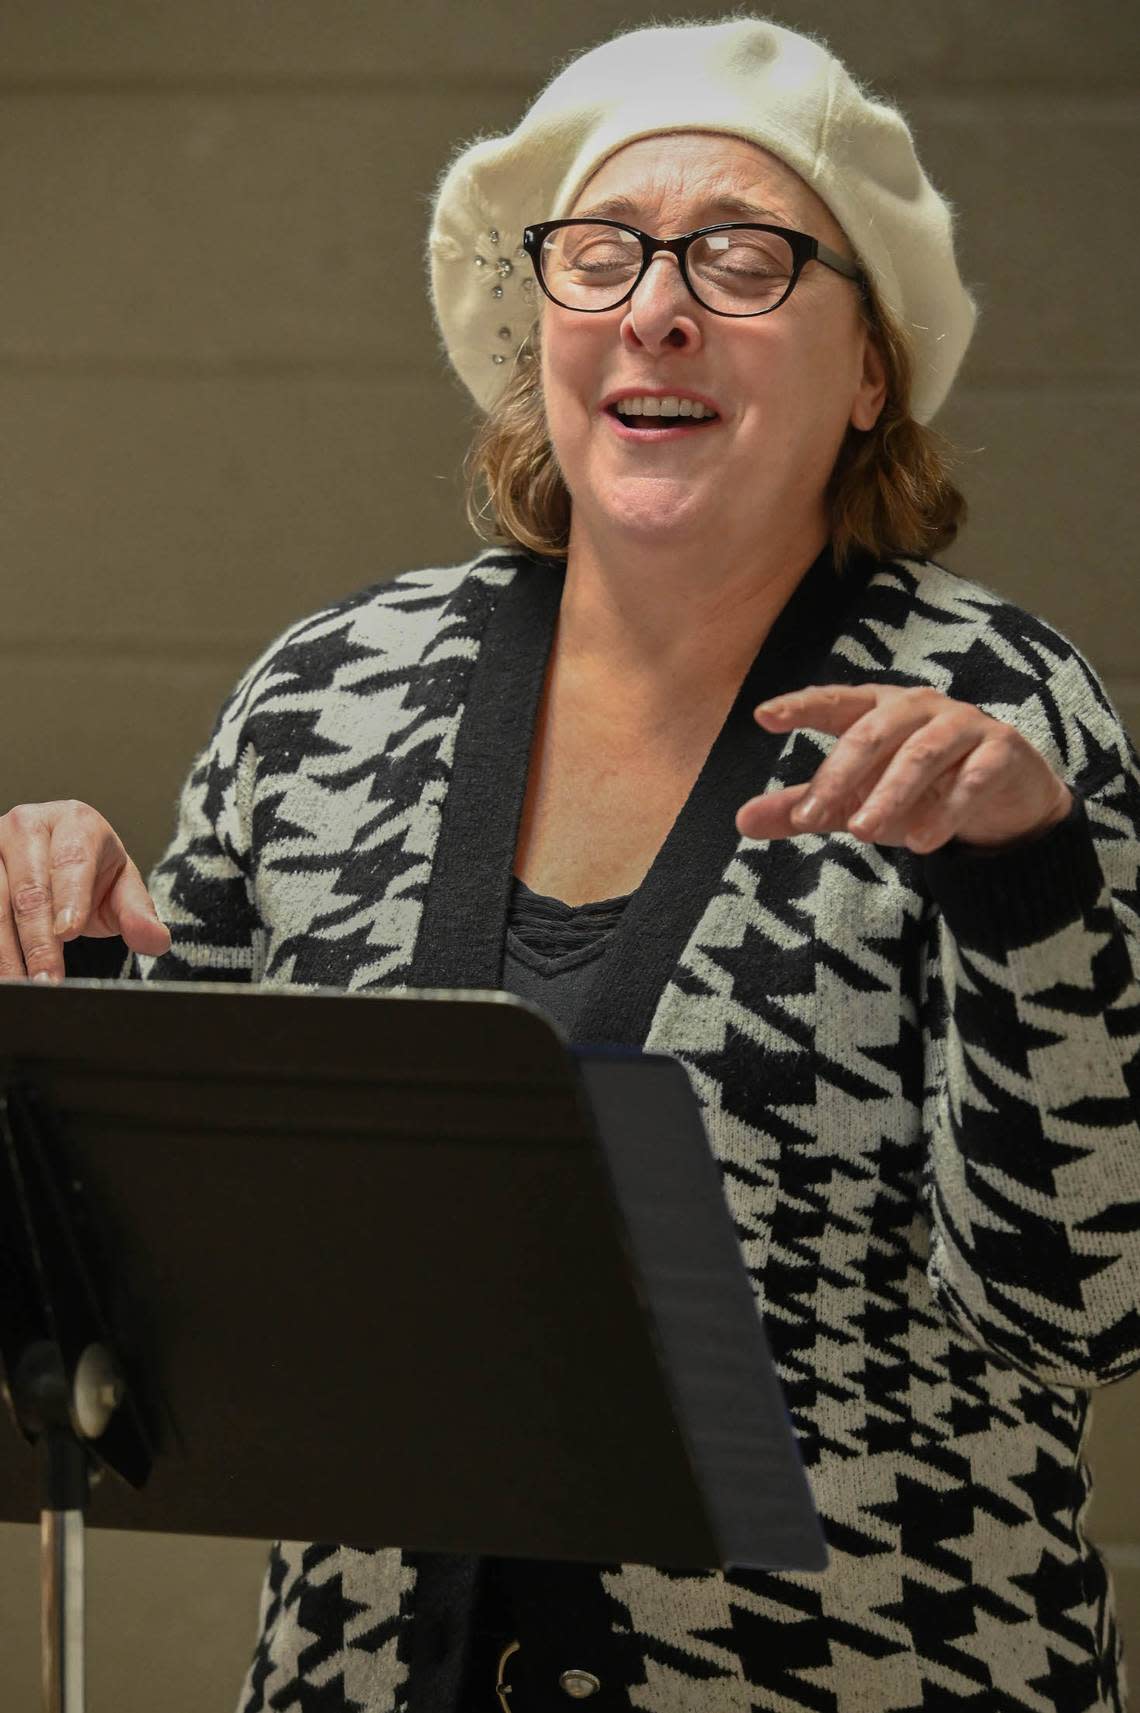 Karyn Czar, an anchor and reporter and Lexington stage performer, is slated to be the emcee and one of the featured performers in “On My Way,” a program of songs by female composers presented by the Lexington Theatre Company Feb. 18, 2023 at First United Methodist Church of Lexington. She is shown is rehearsal at First United Methodist on Feb. 11, 2023 with director Brance Cornelius and music director Nathaniel Beliveau.